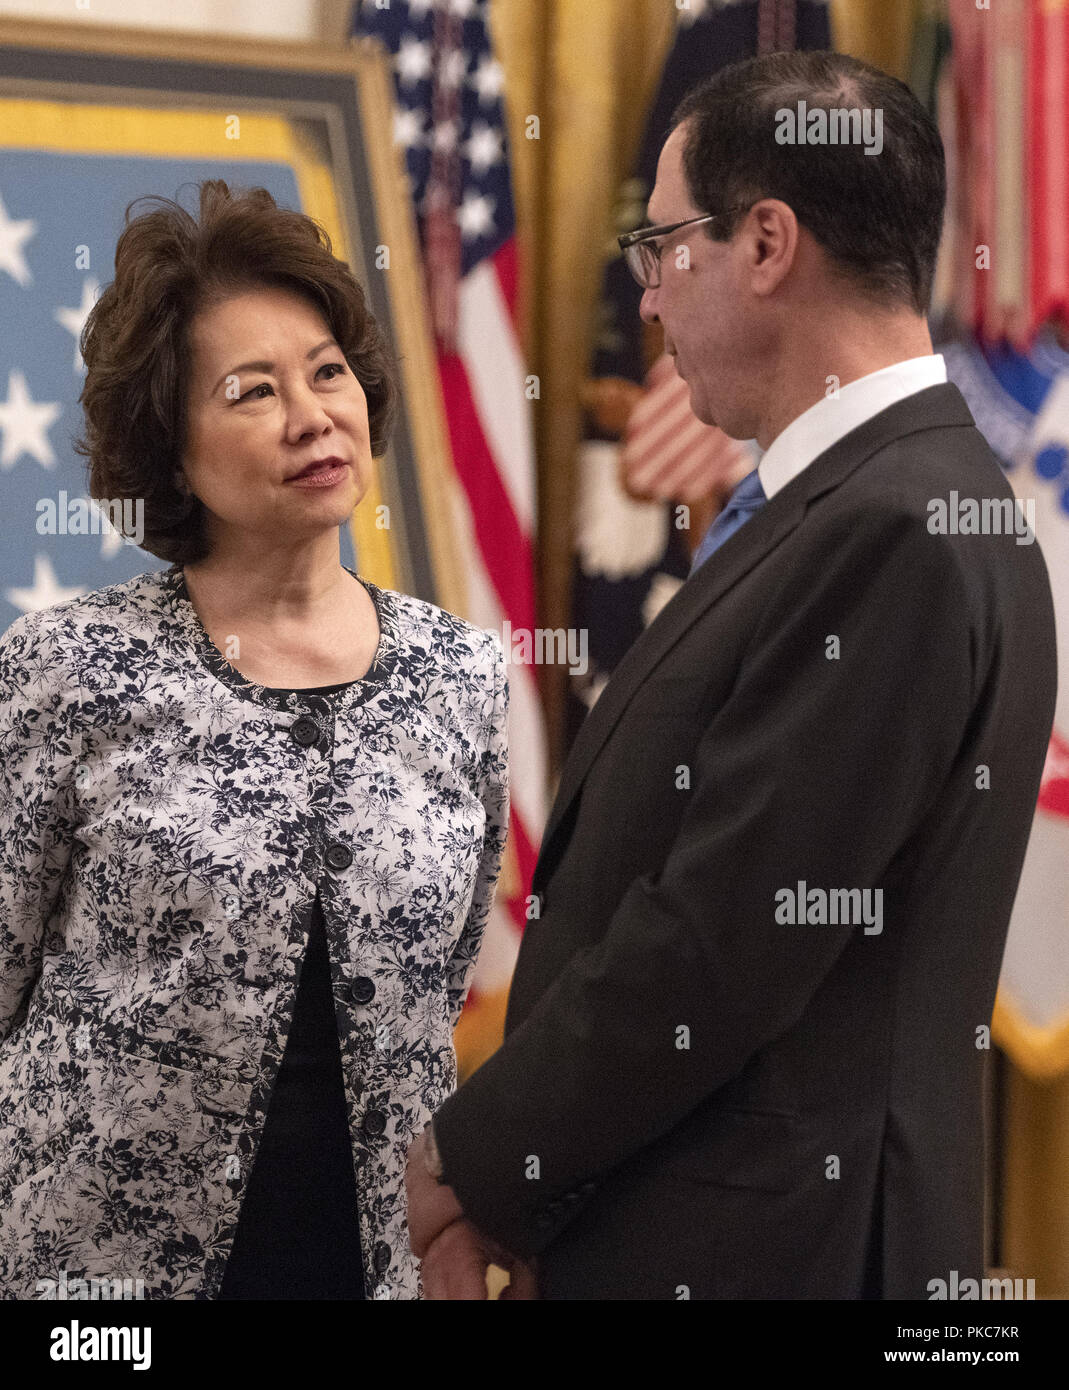 Washington, District of Columbia, USA. 12th Sep, 2018. United States Secretary of Transportation Elaine Chao, left, in conversation with US Secretary of the Treasury Steven Mnuchin, right, prior to the arrival of US President Donald J. Trump who will make remarks at the Congressional Medal of Honor Society Reception in the East Room of the White House in Washington, DC on Wednesday, September 12, 2018 Credit: Ron Sachs/CNP/ZUMA Wire/Alamy Live News Stock Photo